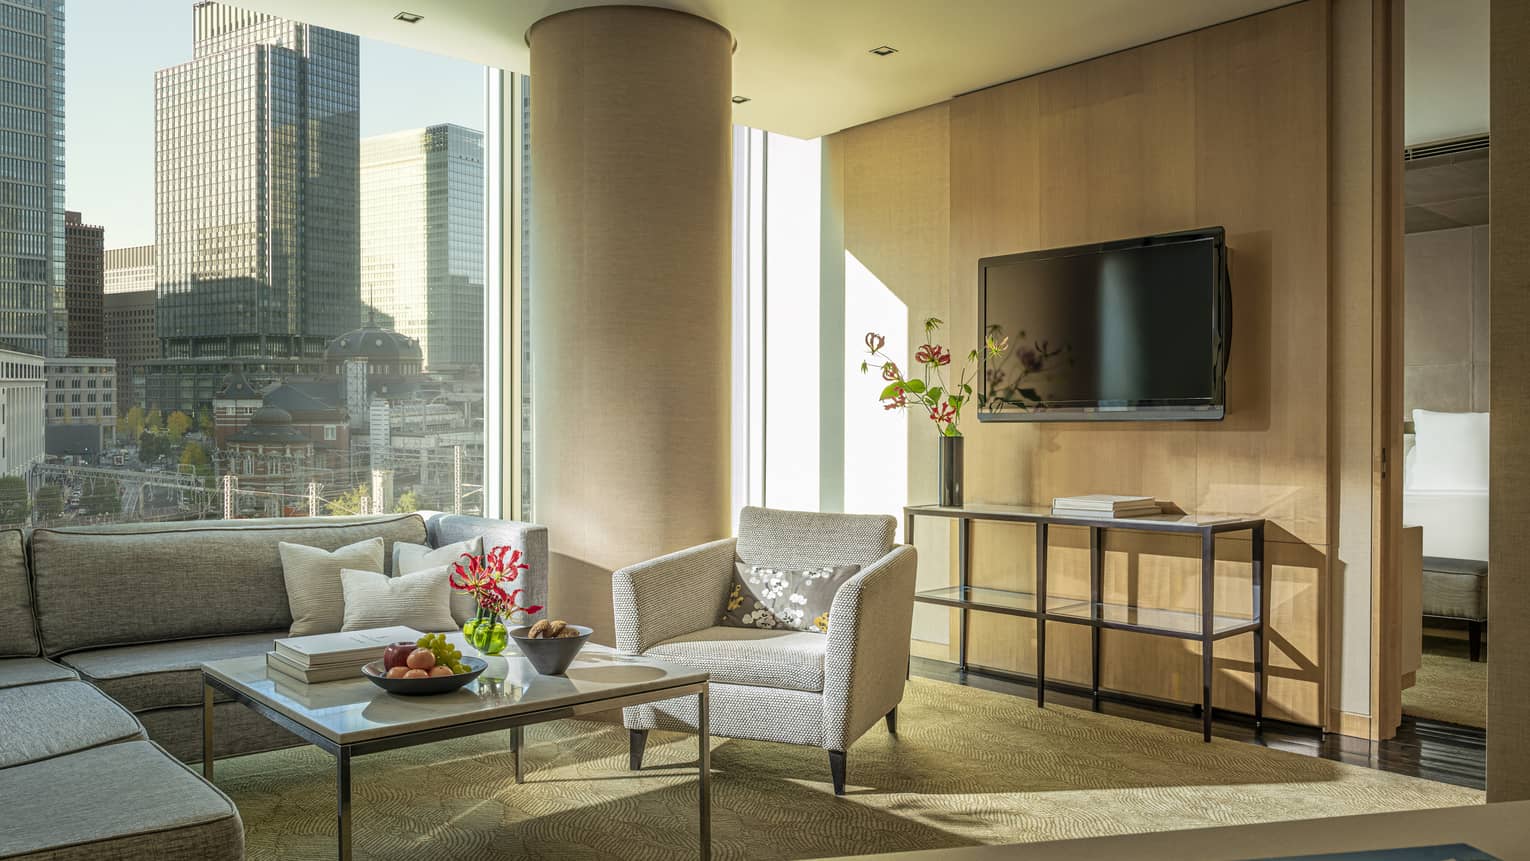 Four Seasons Executive Suite living area with floor-to-ceiling windows with downtown city views